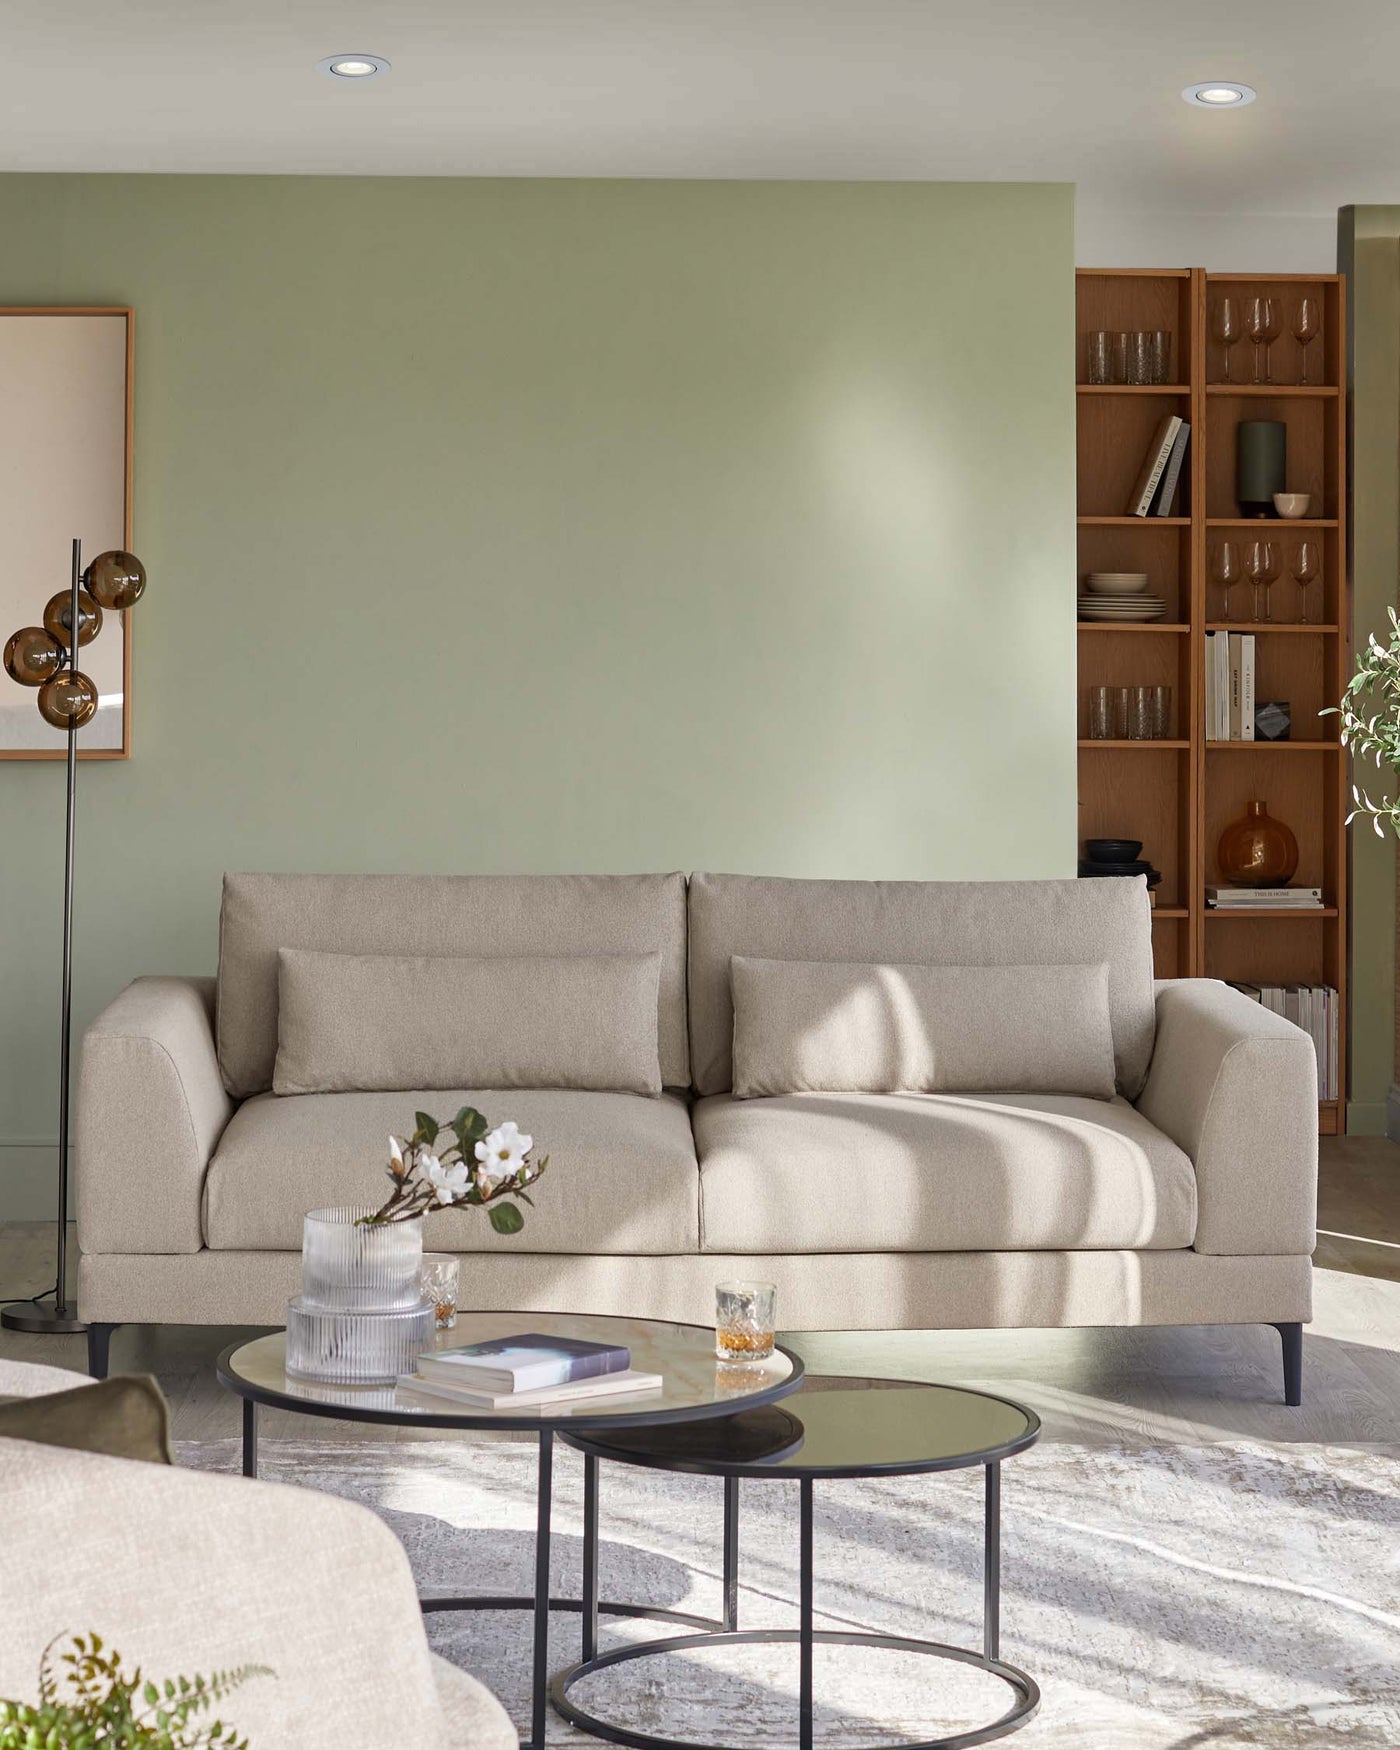 Elegant modern living room featuring a neutral-toned three-seater sofa with clean lines and plush cushions, paired with two round nesting coffee tables with black metal frames and glass tops, set on a textured off-white area rug. A wooden bookshelf with open shelving is in the background, displaying an assortment of decorative objects and books. A stylish floor lamp with a golden finish adds a touch of warmth to the space.